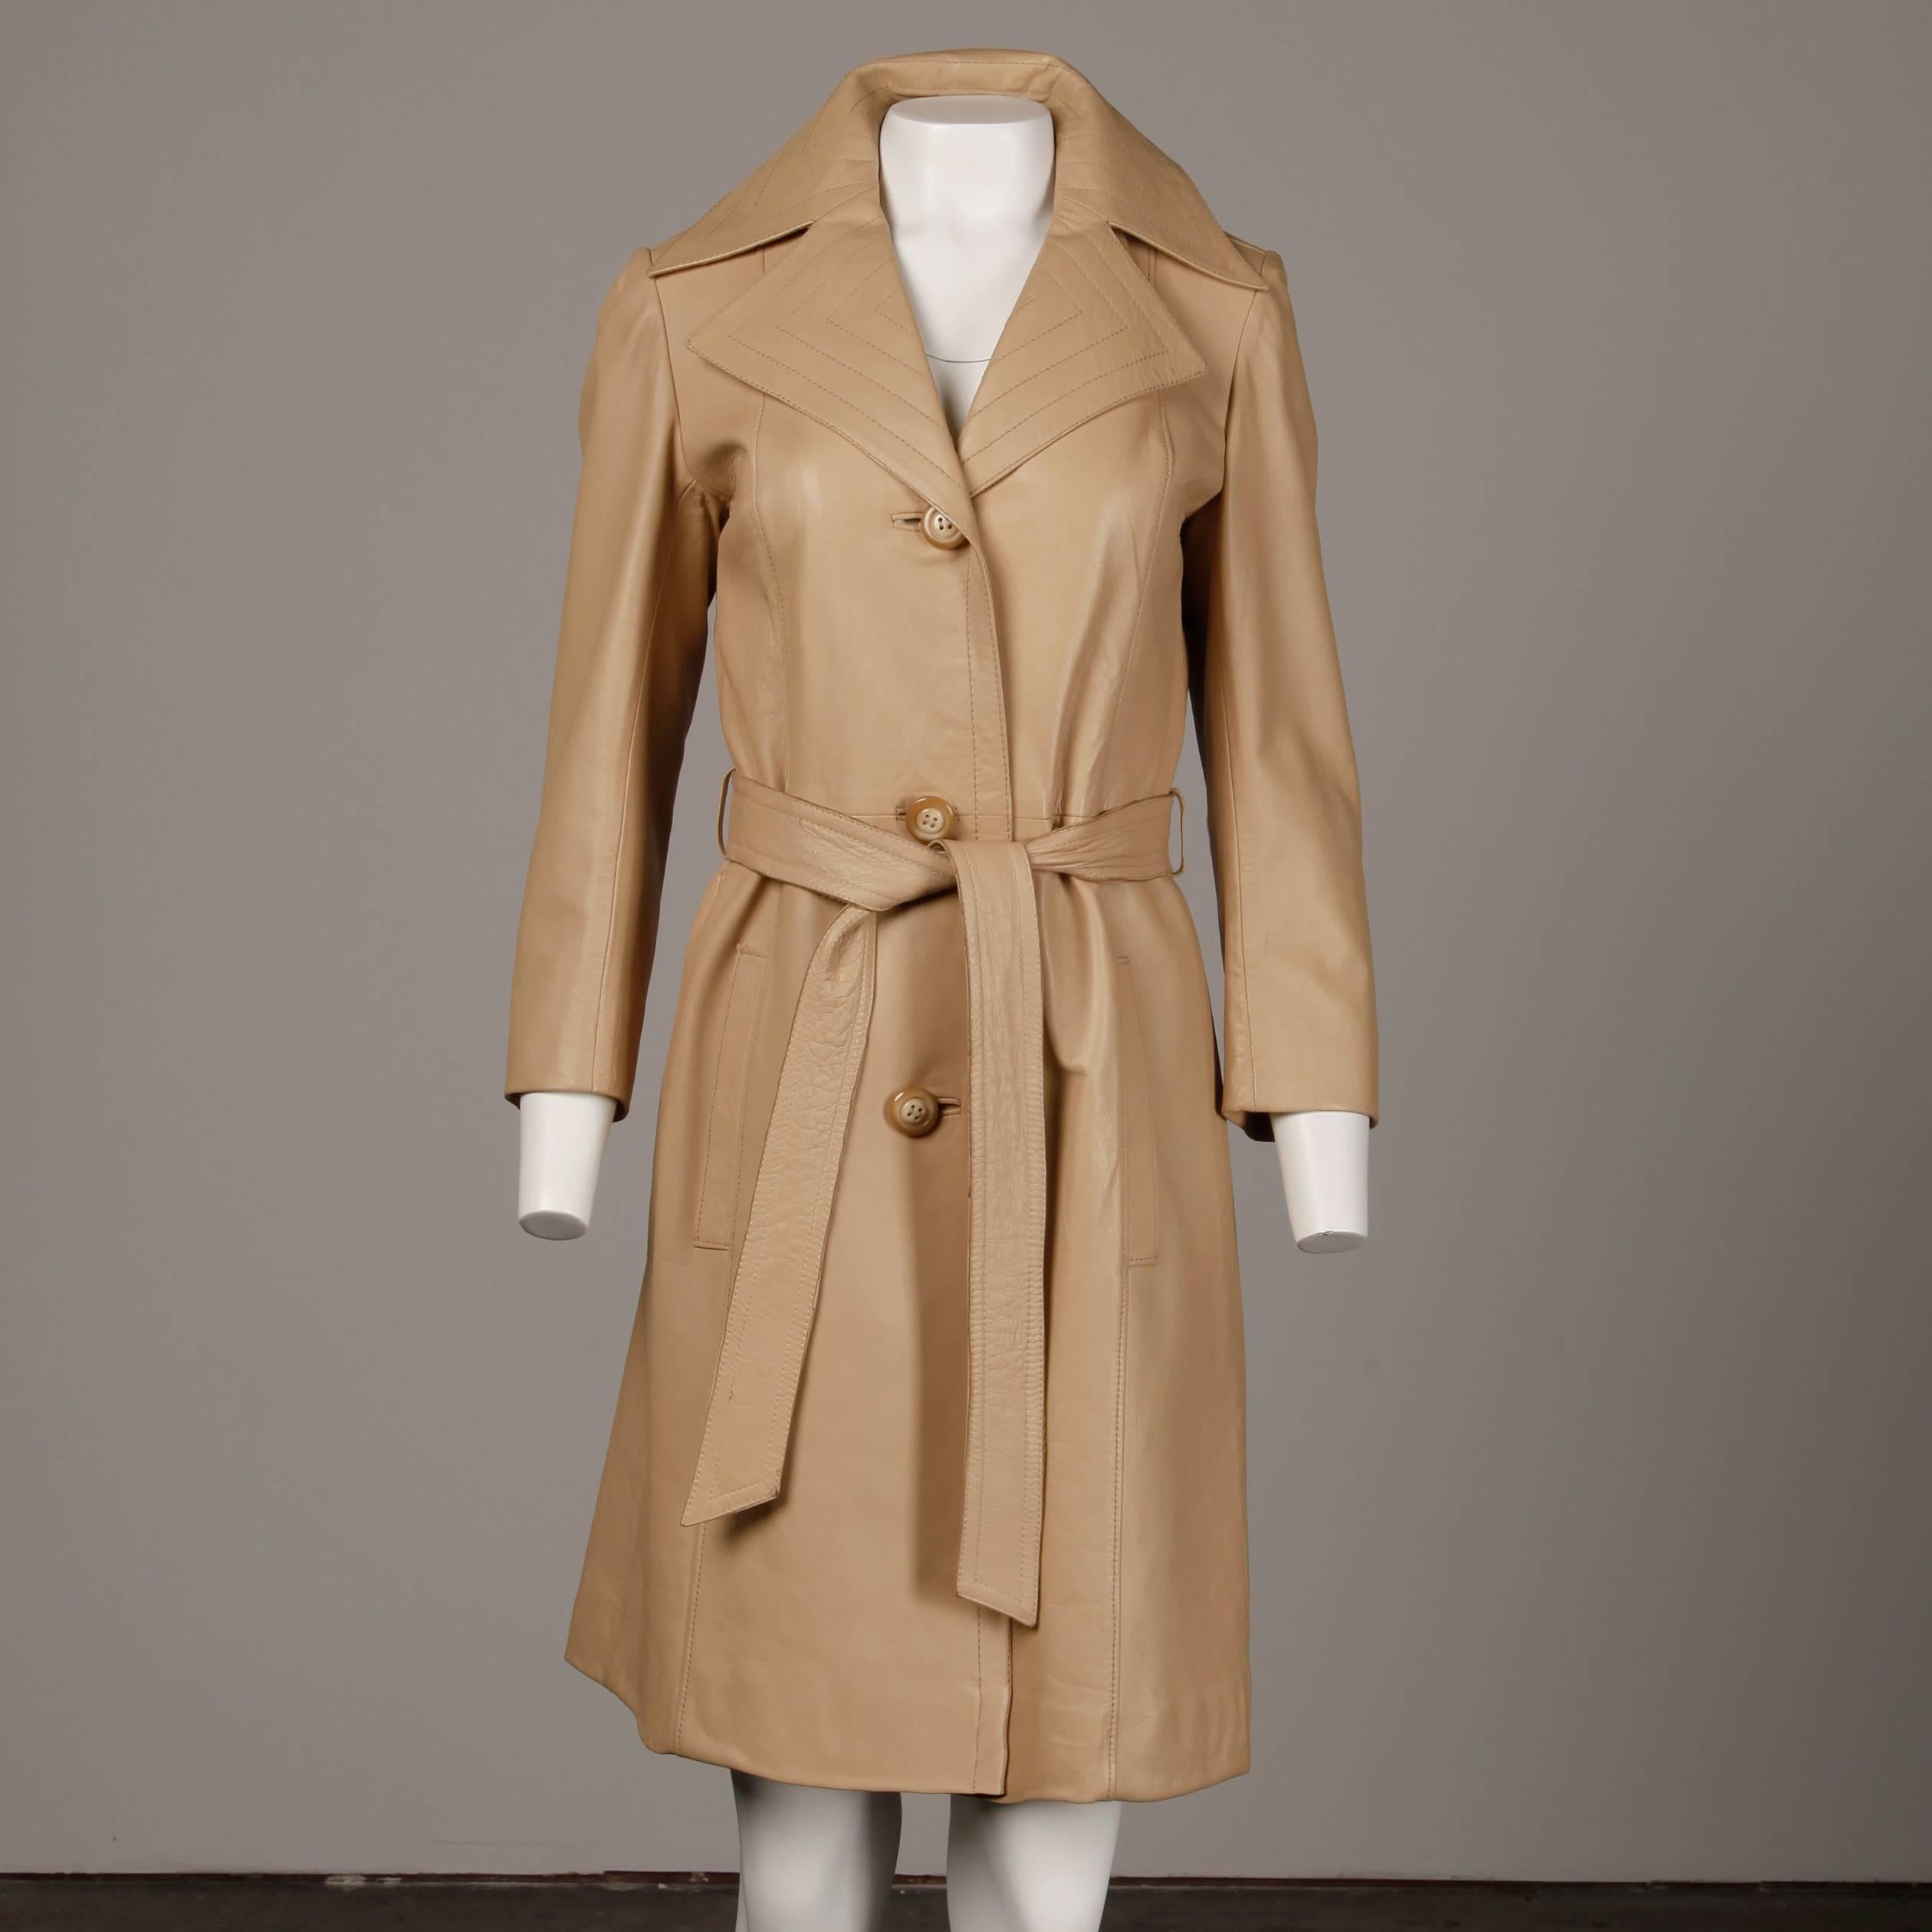 Gorgeous soft beige leather trench coat with matching tie sash belt. Fully lined with front button and tie closure. Front hidden pockets. 100% leather with !00% rayon lining. The marked size is 8, but the jacket fits like a modern size small. The